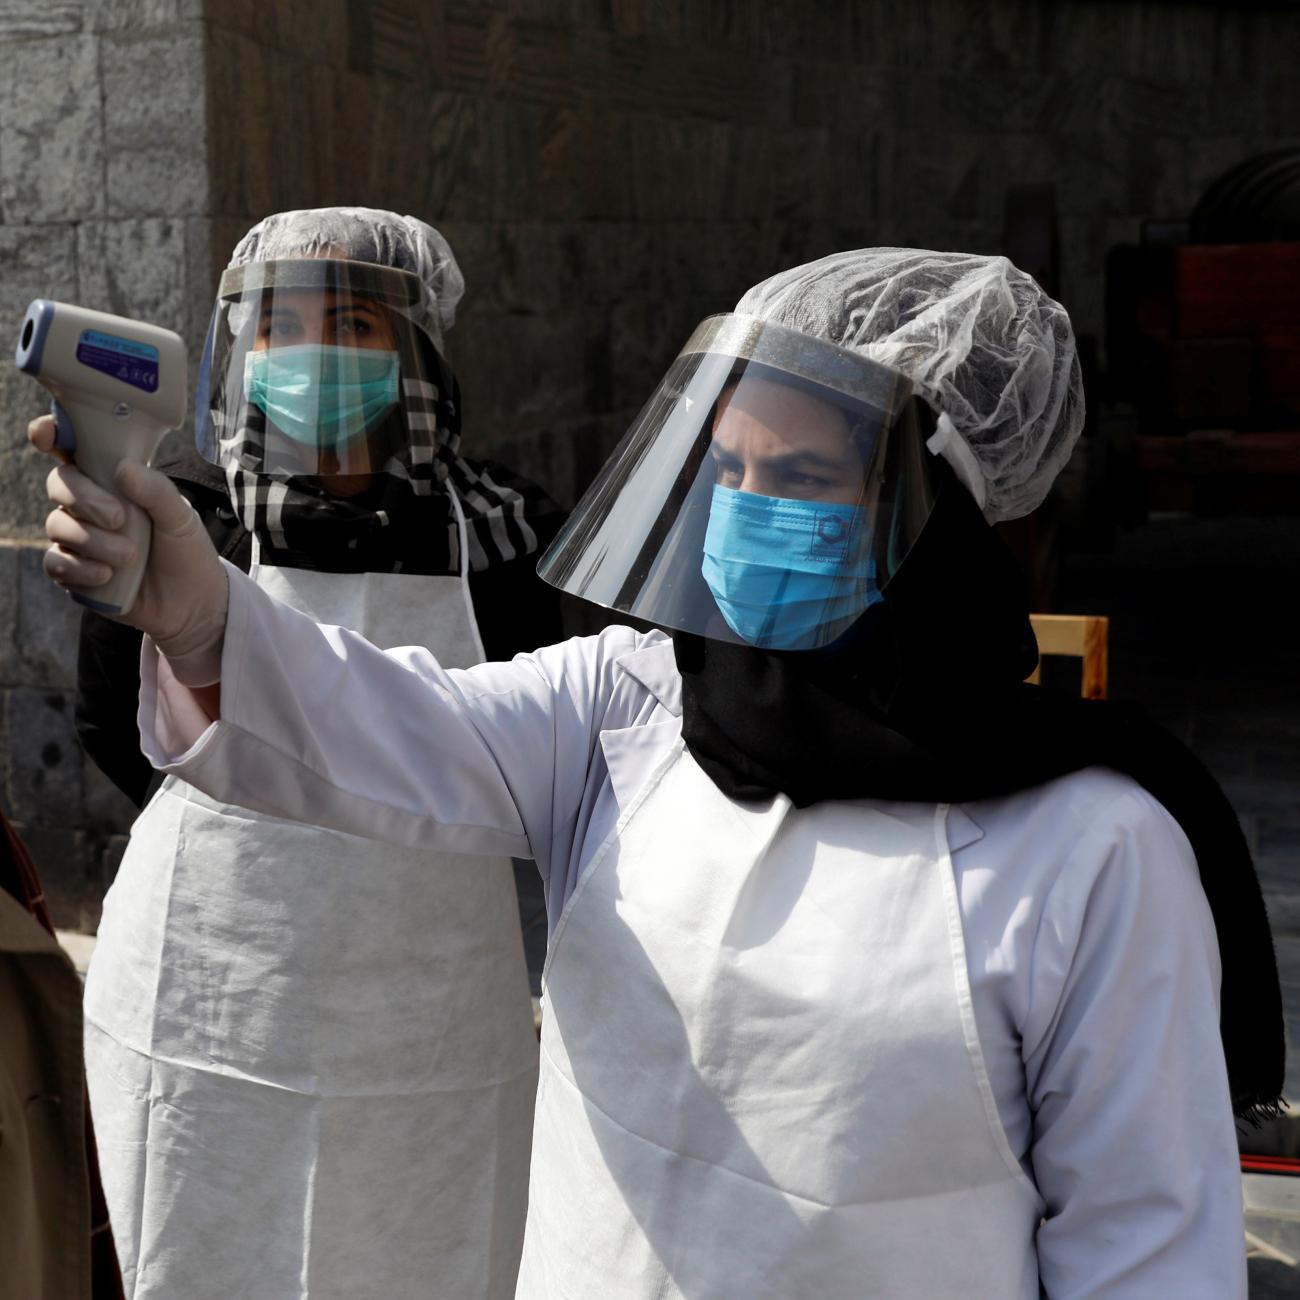 An Afghan health worker in protective gear checks the temperature of a woman before Afghanistan's President Ashraf Ghani inauguration as president, at the Presidential Palace in Kabul, Afghanistan March 9, 2020.